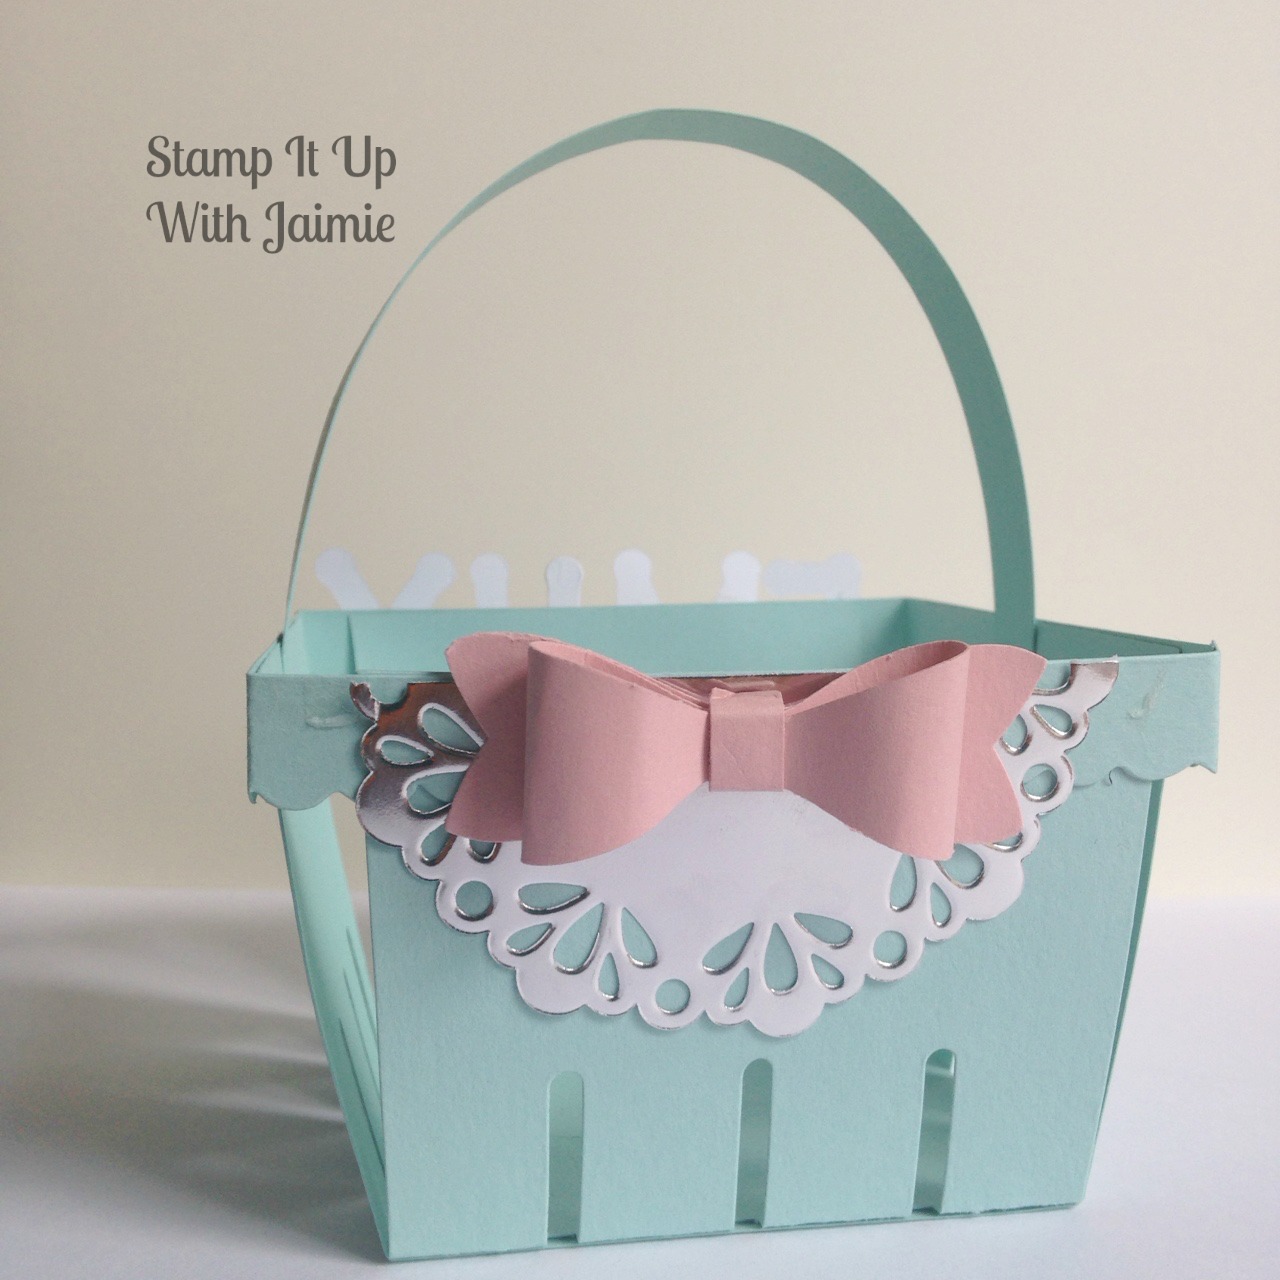 Girl Easter Basket - Stamp It Up With Jaimie